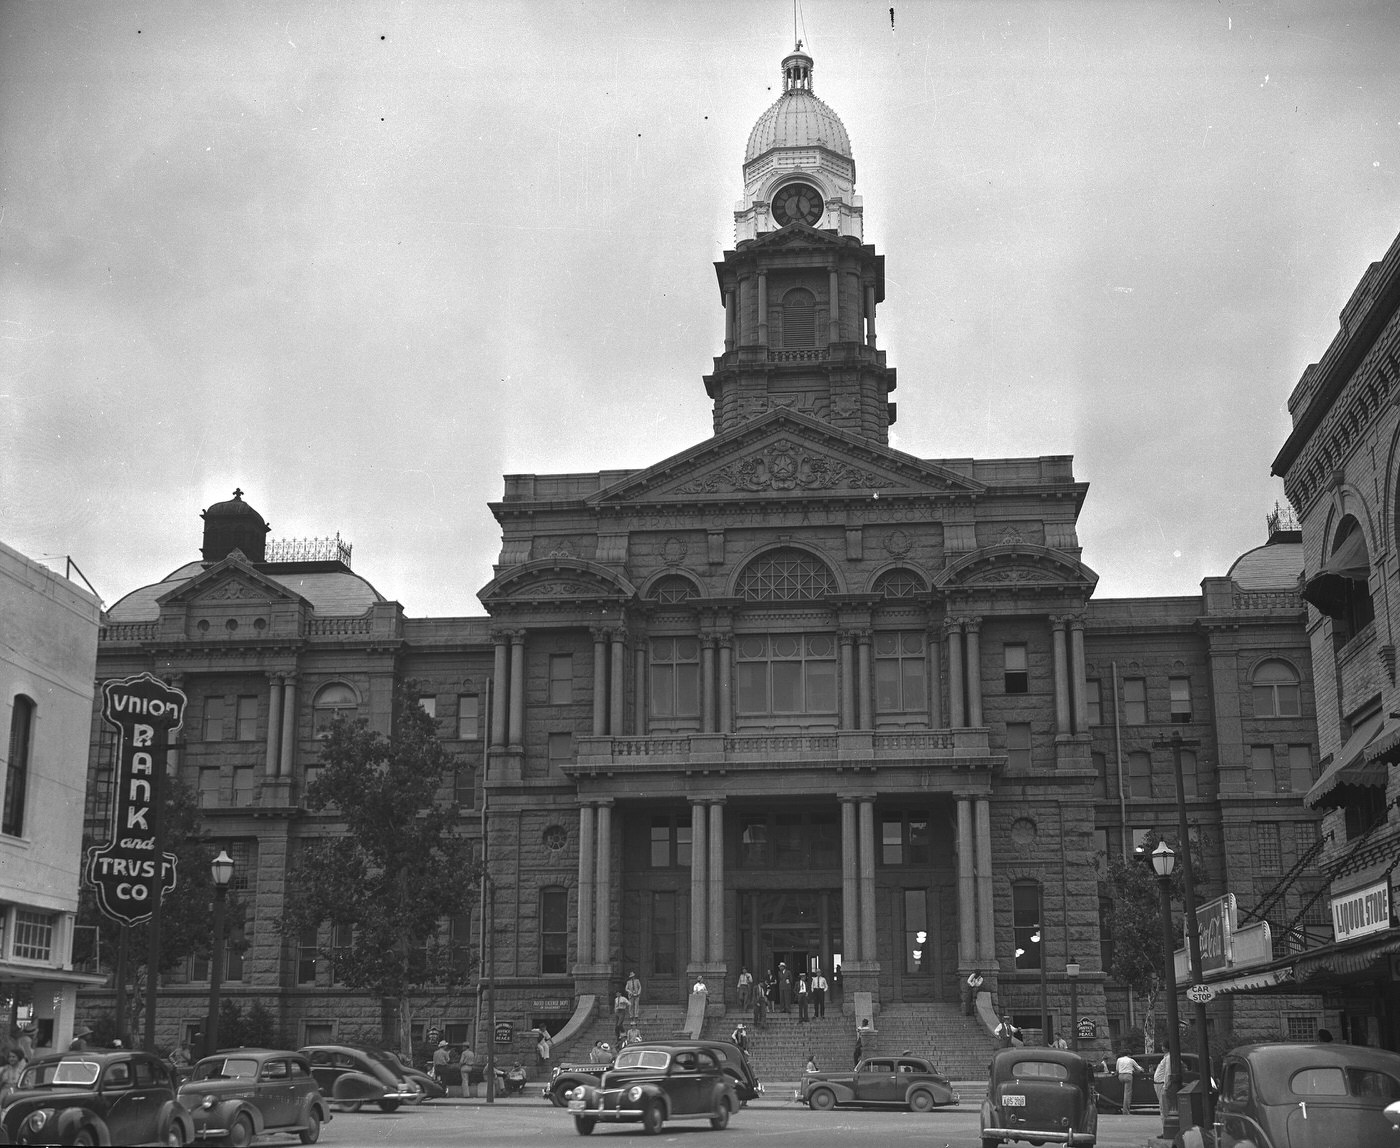 The Tarrant County Courthouse, 1940